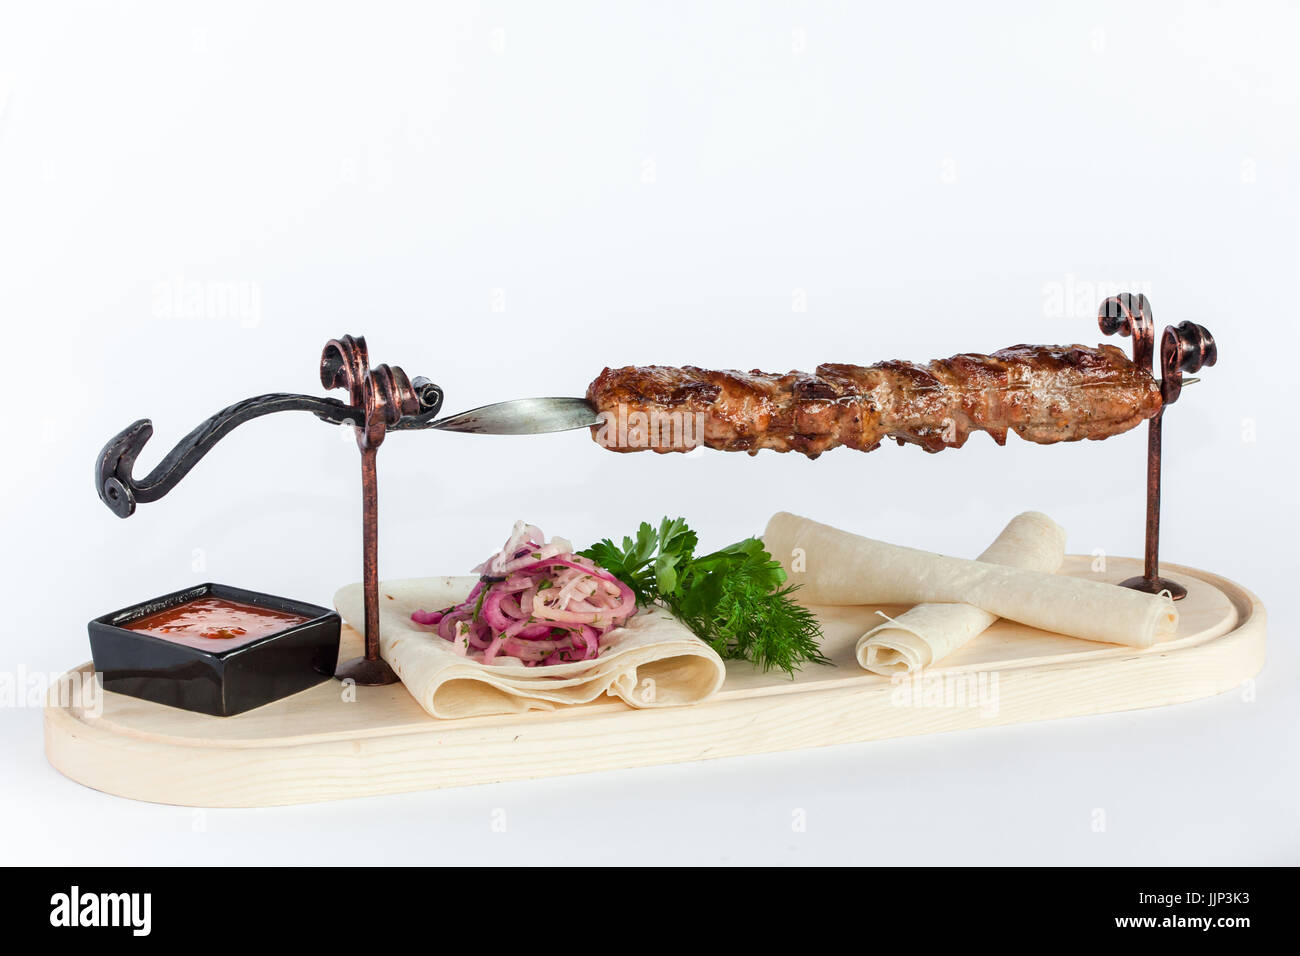 Close Up of Rack of Saucy Barbecue Pork Served on Plate in Restaurant Stock Photo